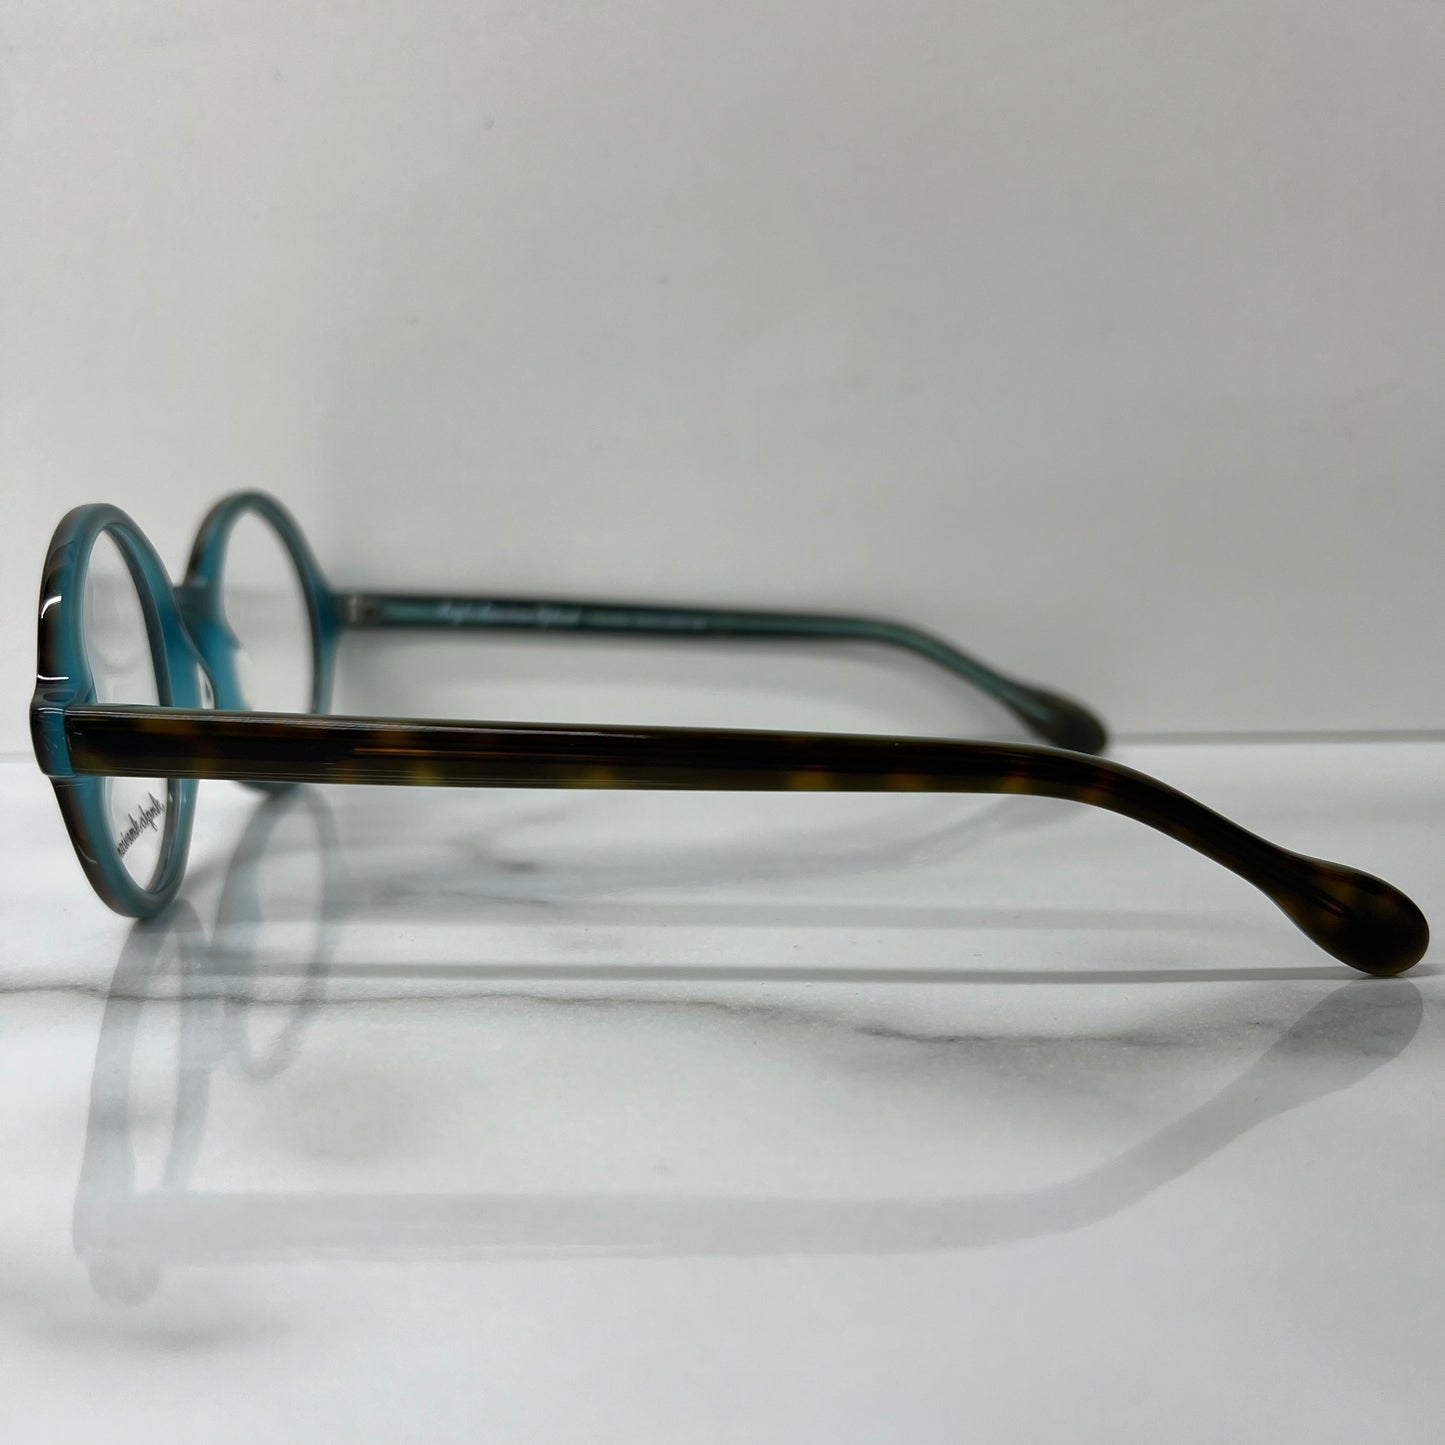 Anglo American Optical 221 - Round Glasses Classic - MHBL